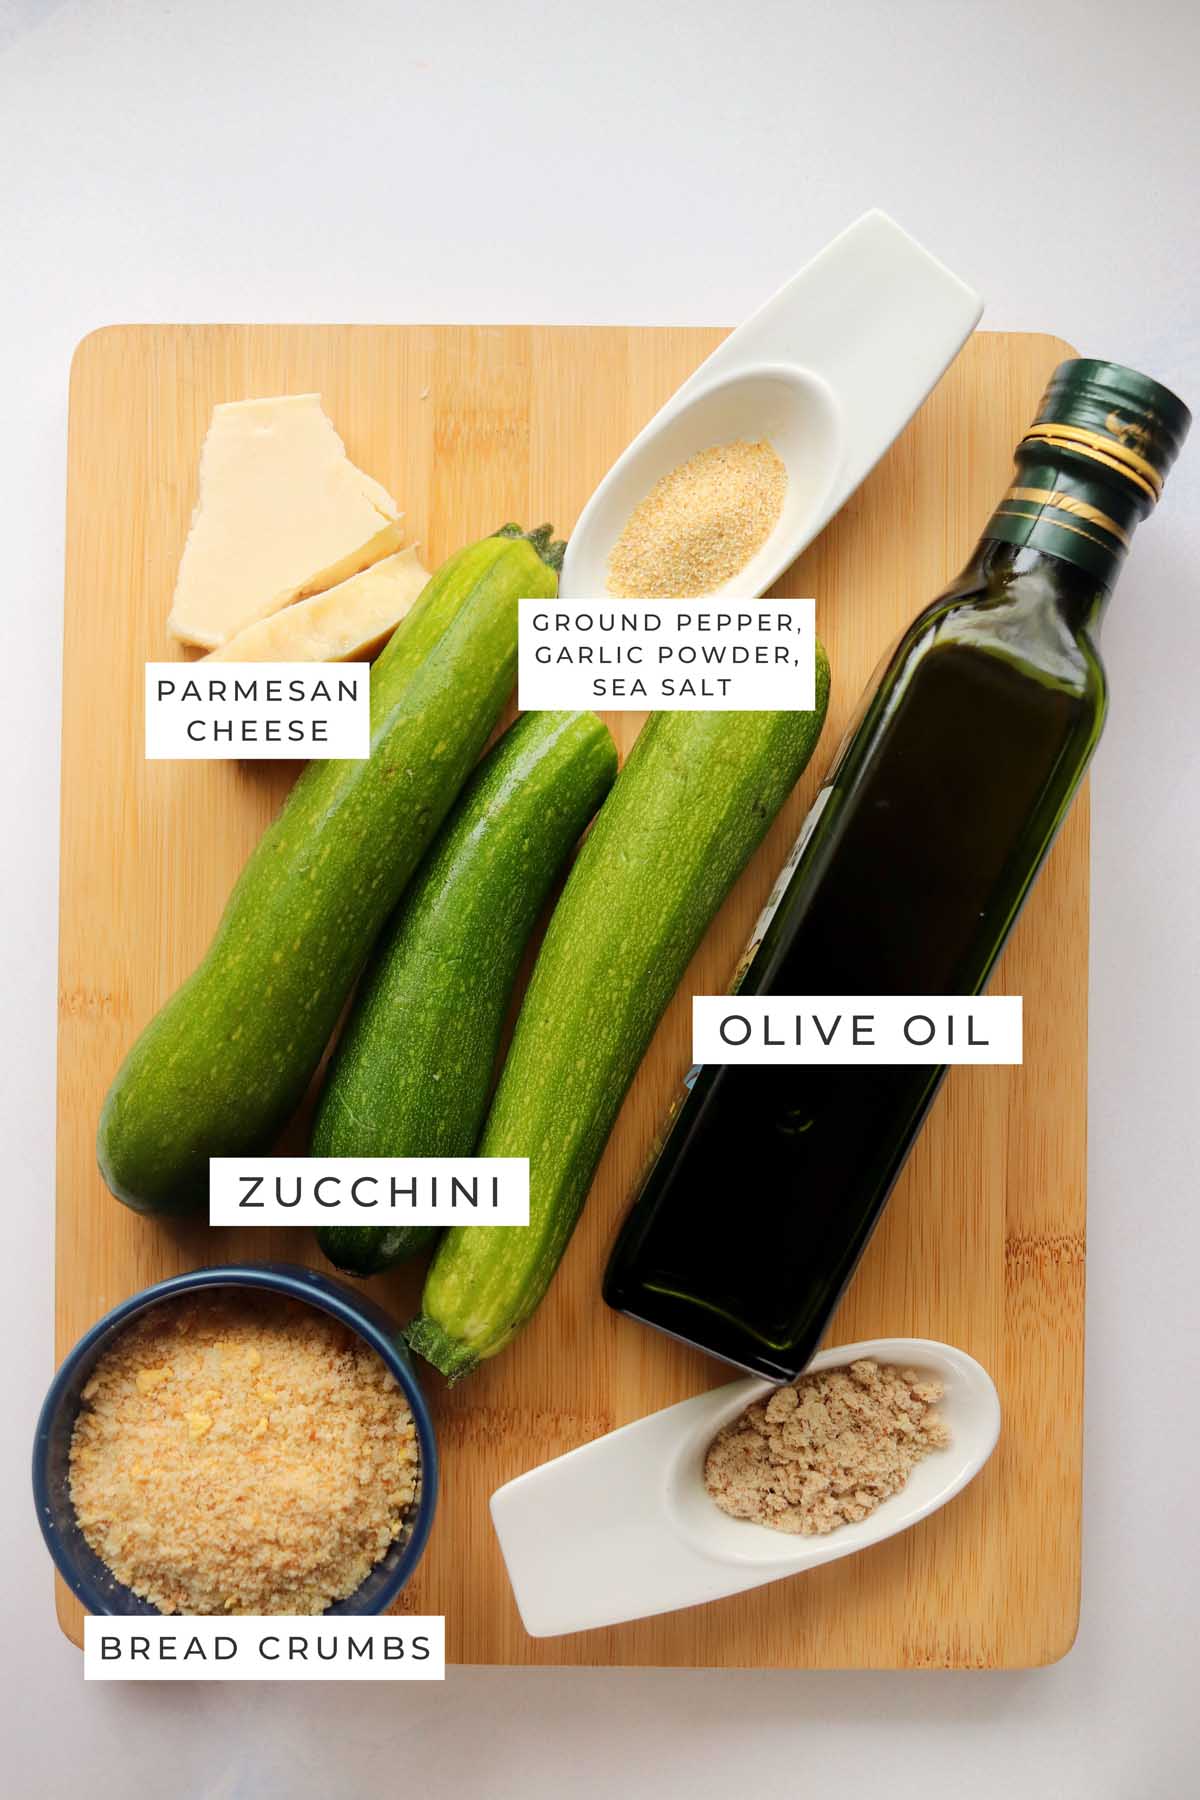 Labeled ingredients for the zucchini chips.